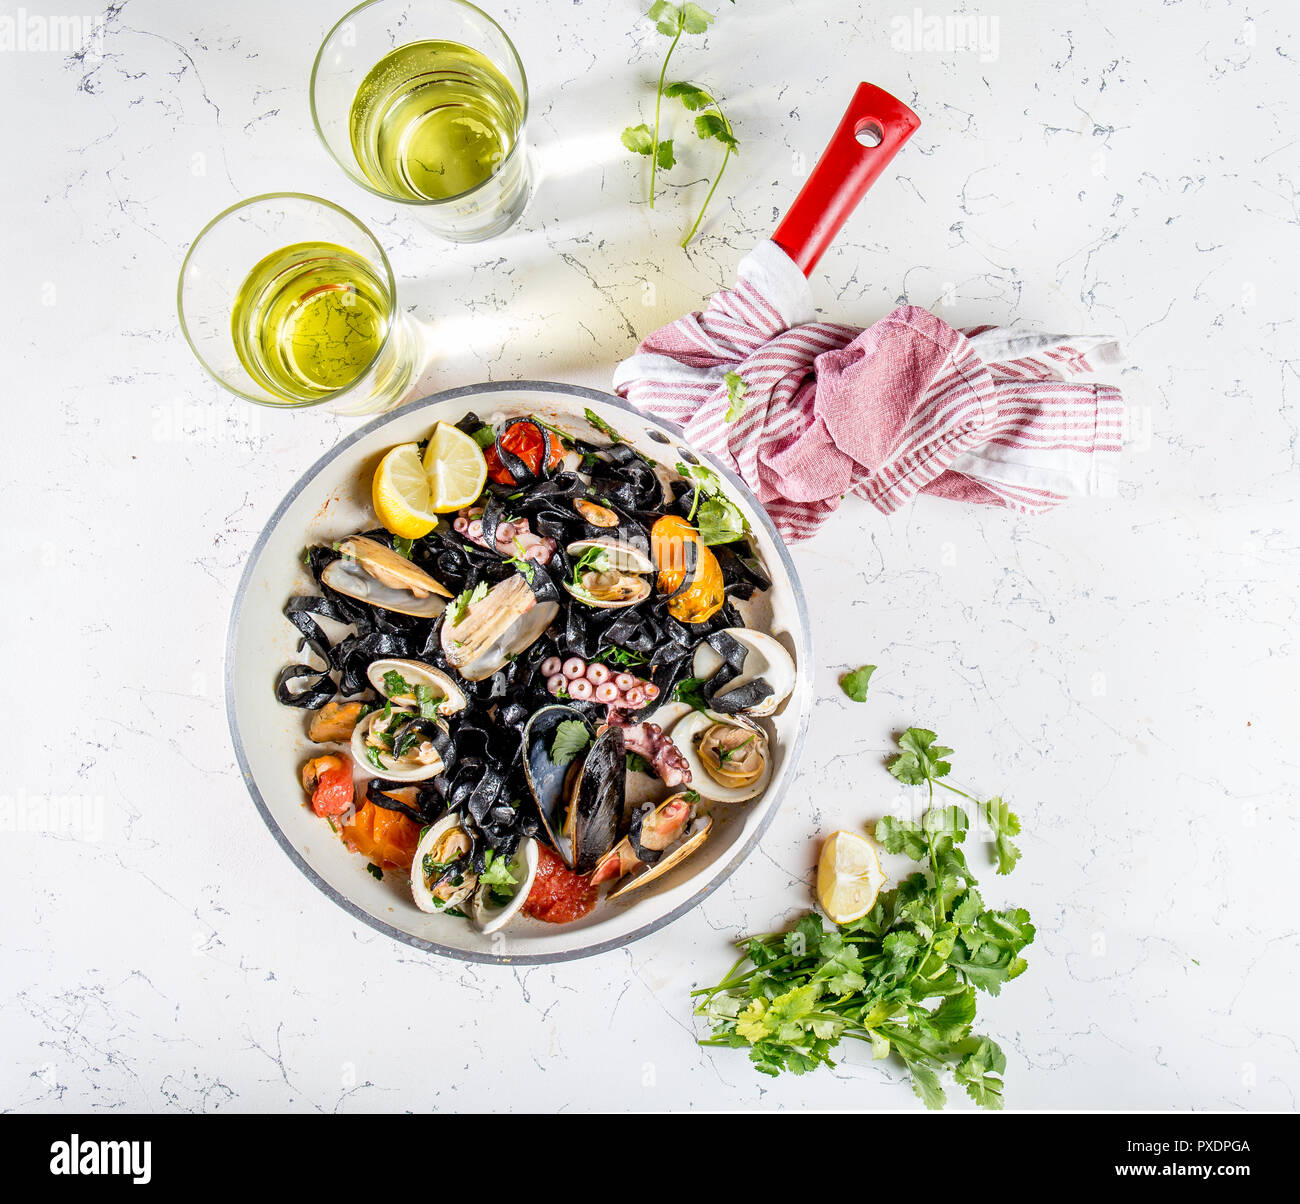 Homemade seafood Black pasta spaghetti with clams mussels octopus vongole in pan with white wine on marbled background Stock Photo